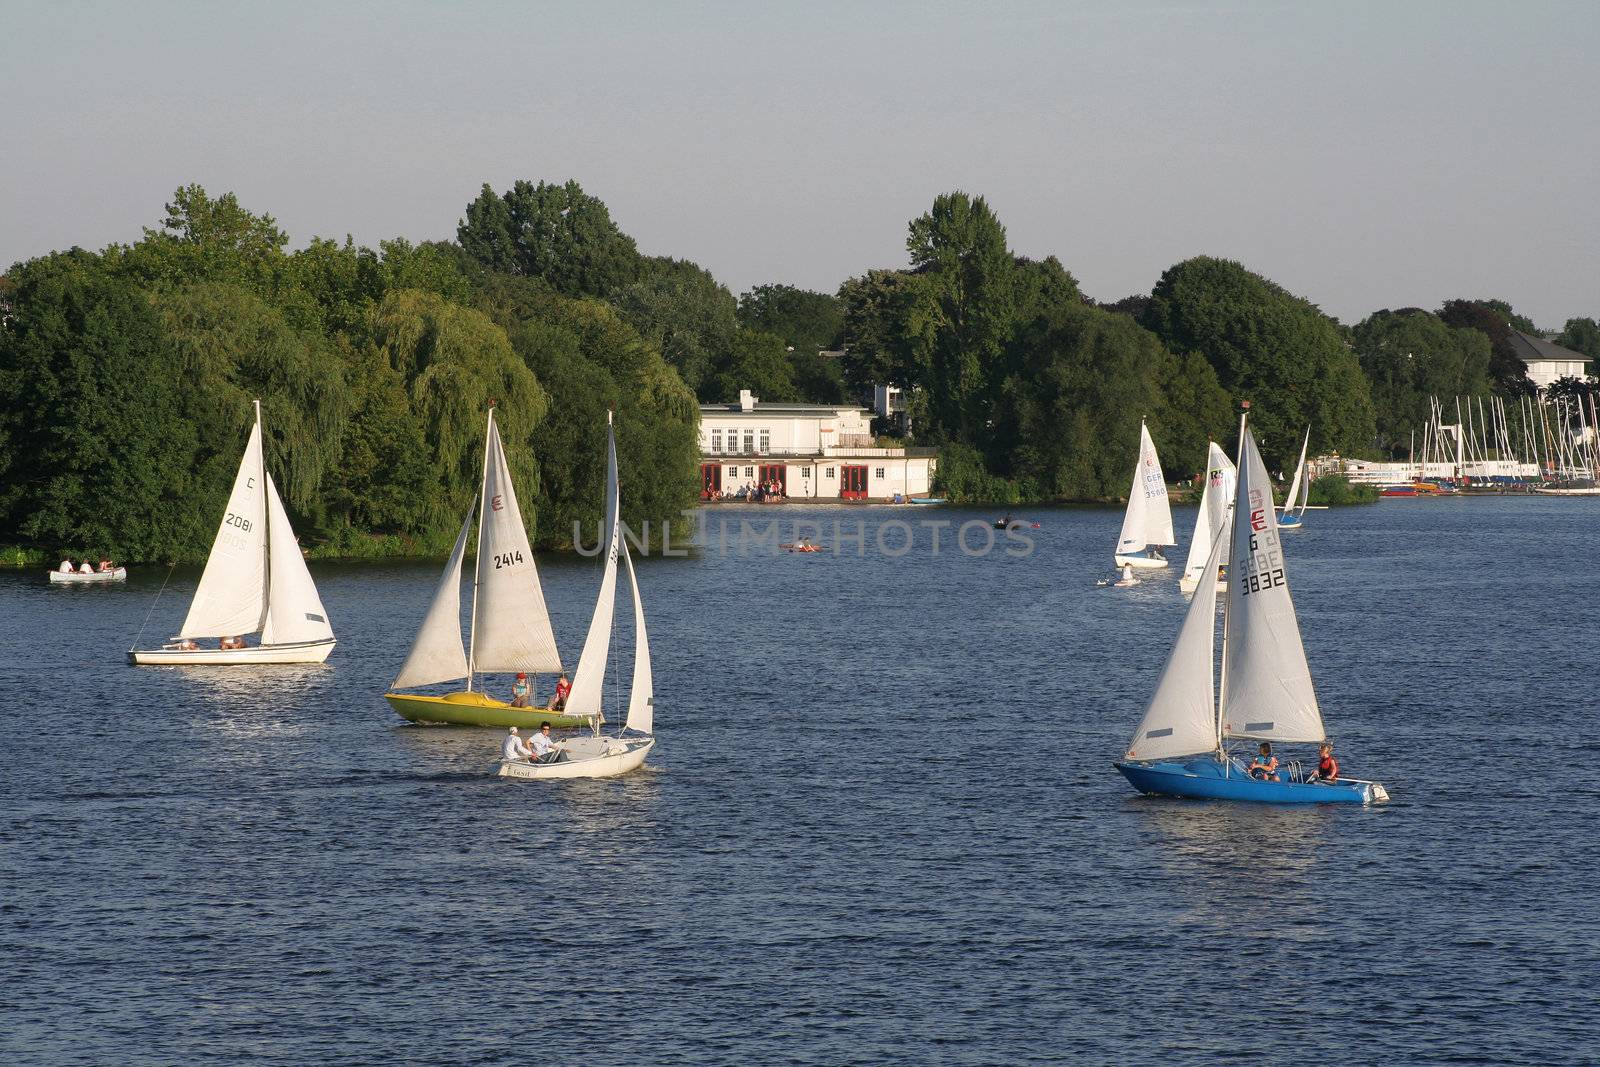 Leisure sailboats on Hamburg's Alster lake on a sunny afternoon in August 2007.